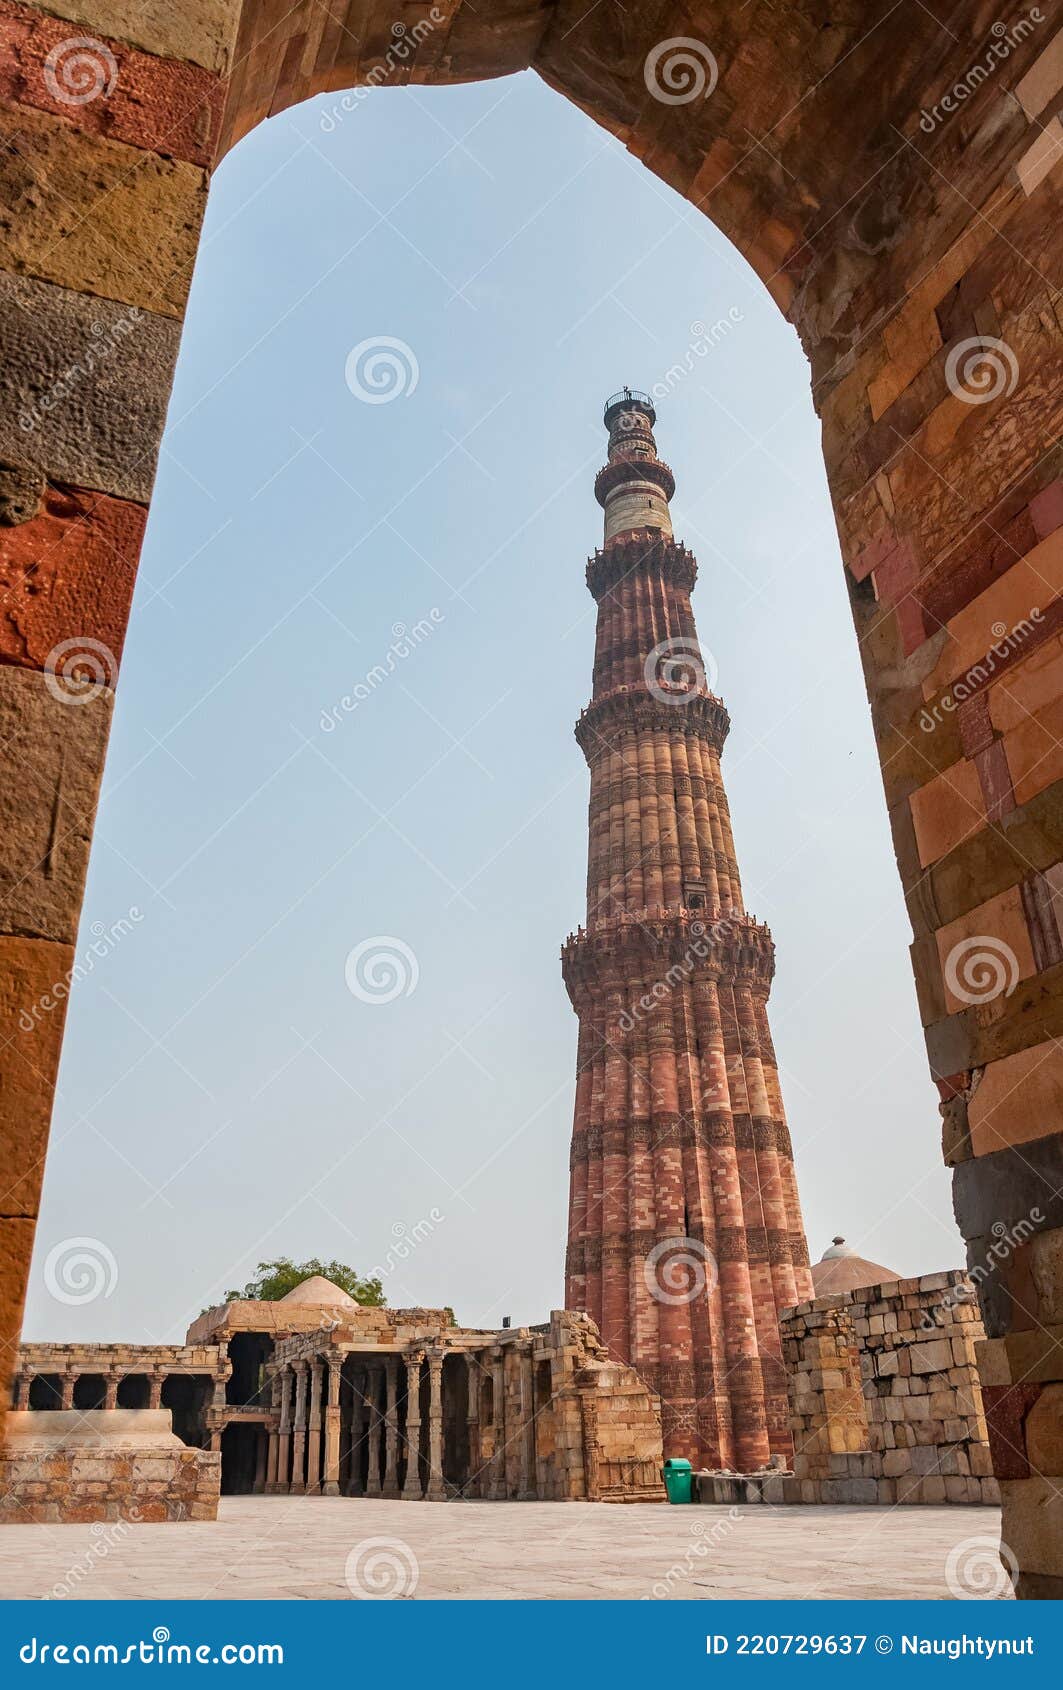 Qutub Minar The Tallest Minaret In India Is A Marble And Red Sandstone